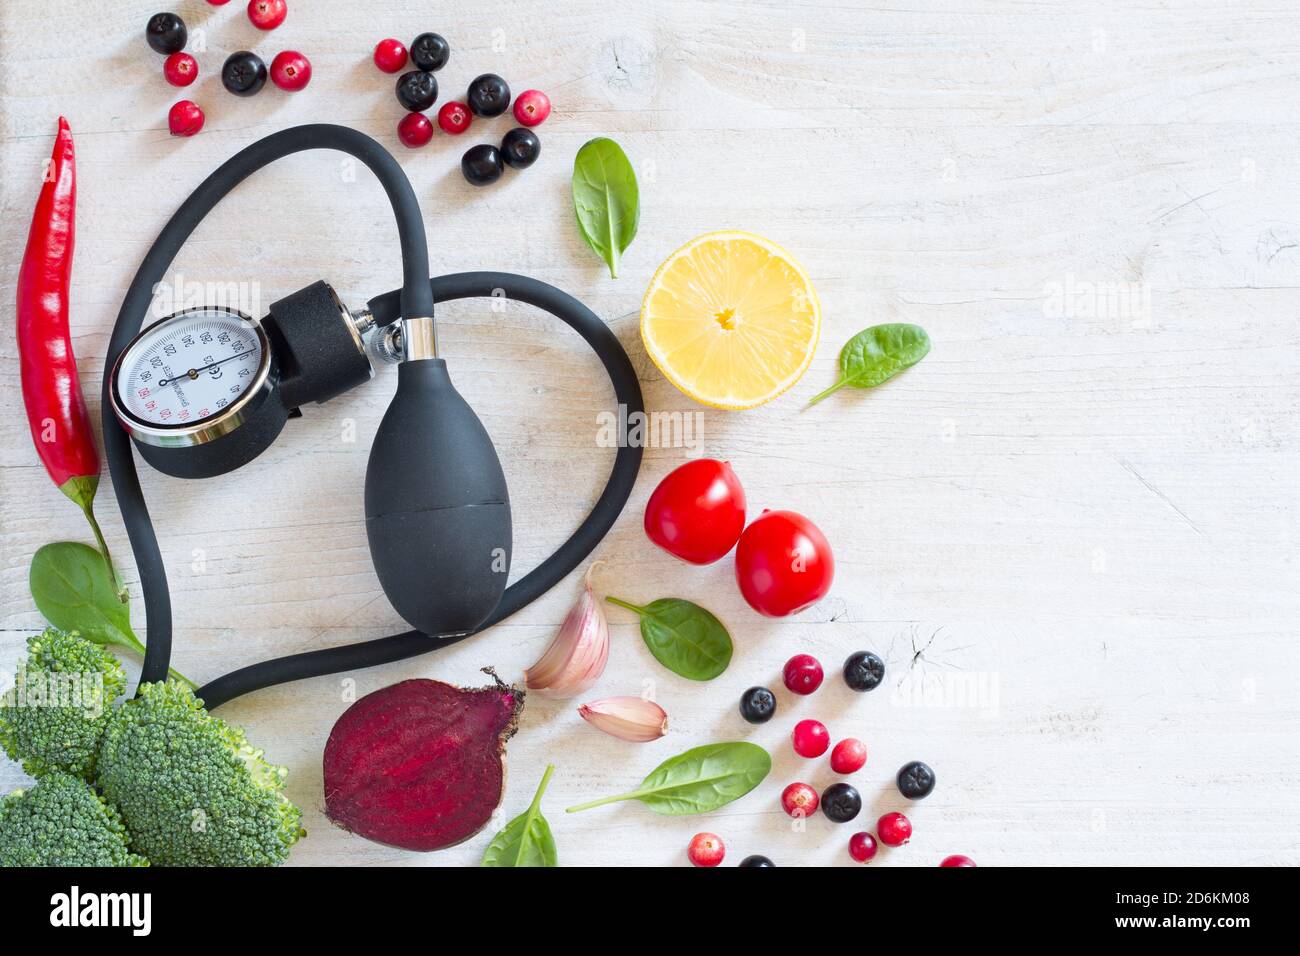 Heart-shaped blood pressure monitor and vegetables with fruits to prevent hypertension, healthy diet concept Stock Photo